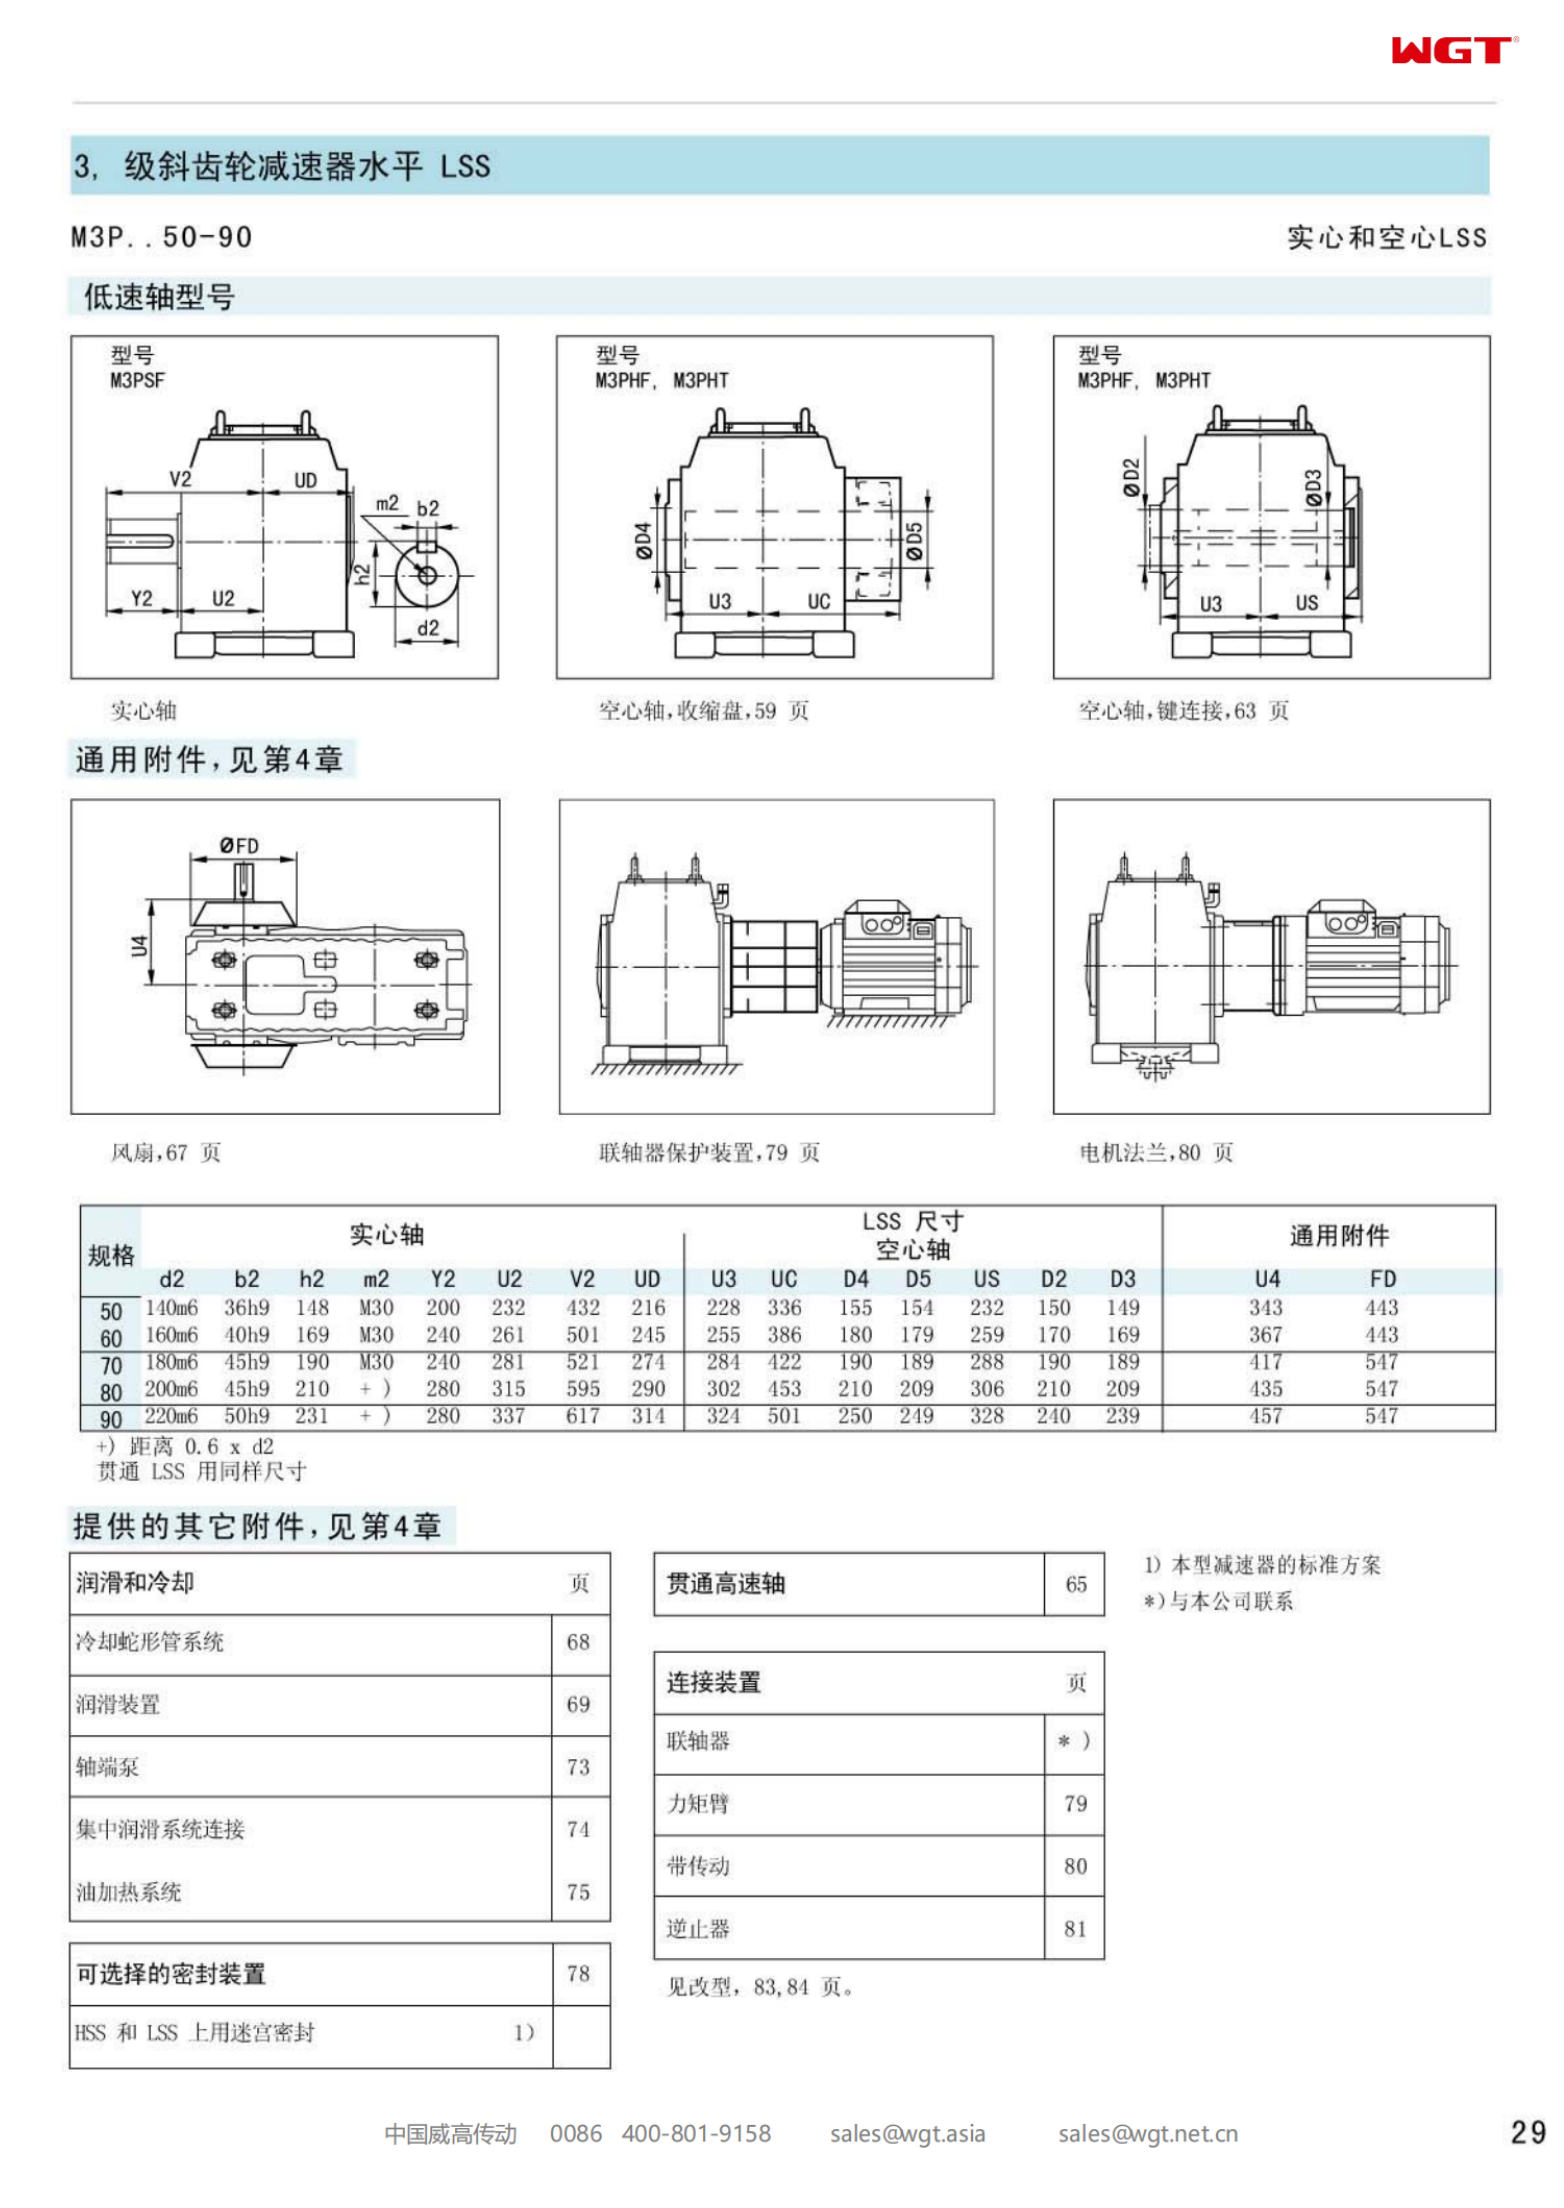 M3PHT90 Replace_SEW_M_Series Gearbox